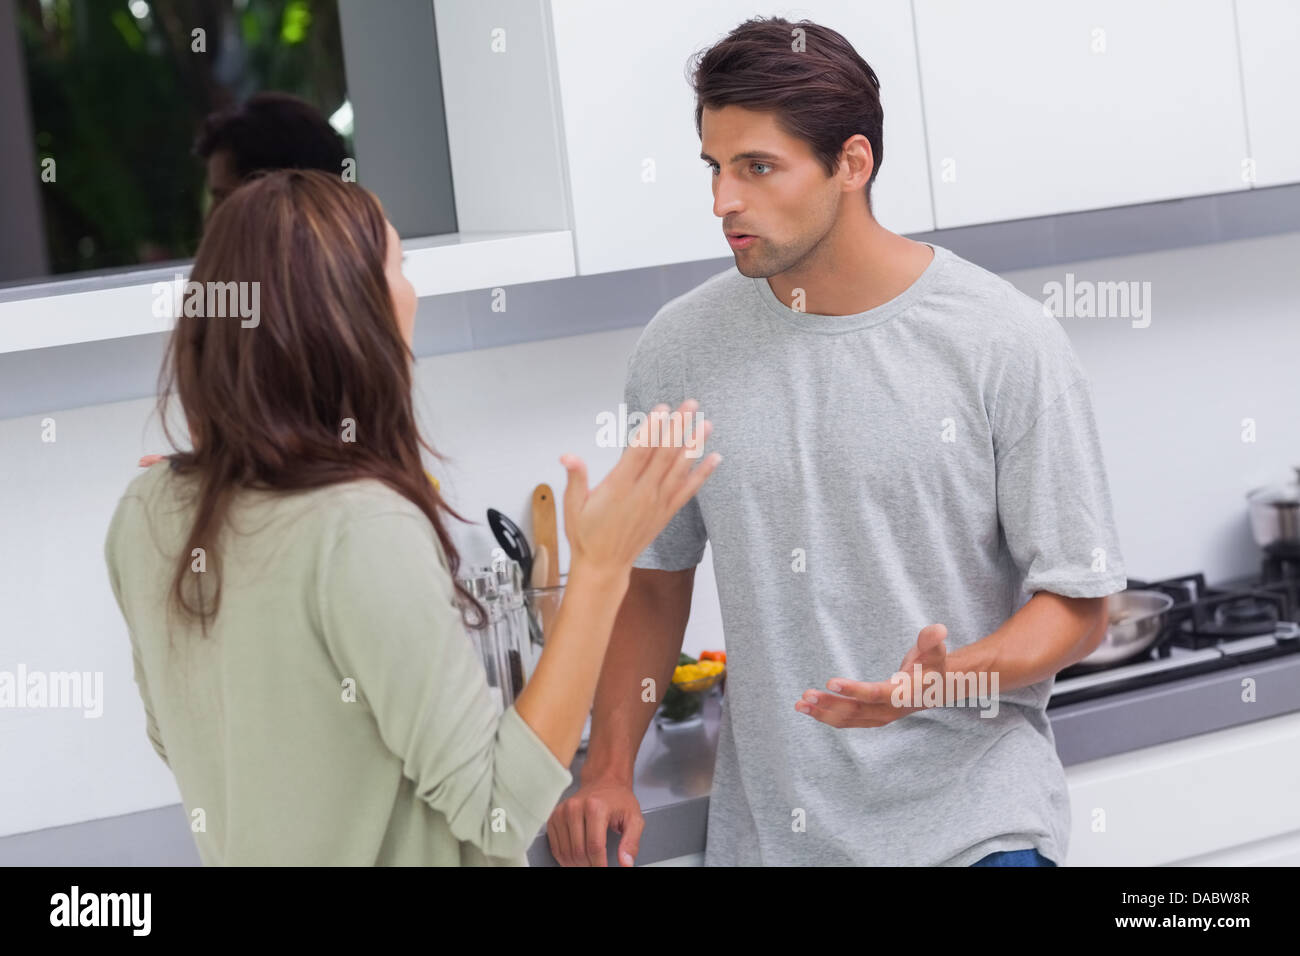 Couple arguing in the kitchen Stock Photo